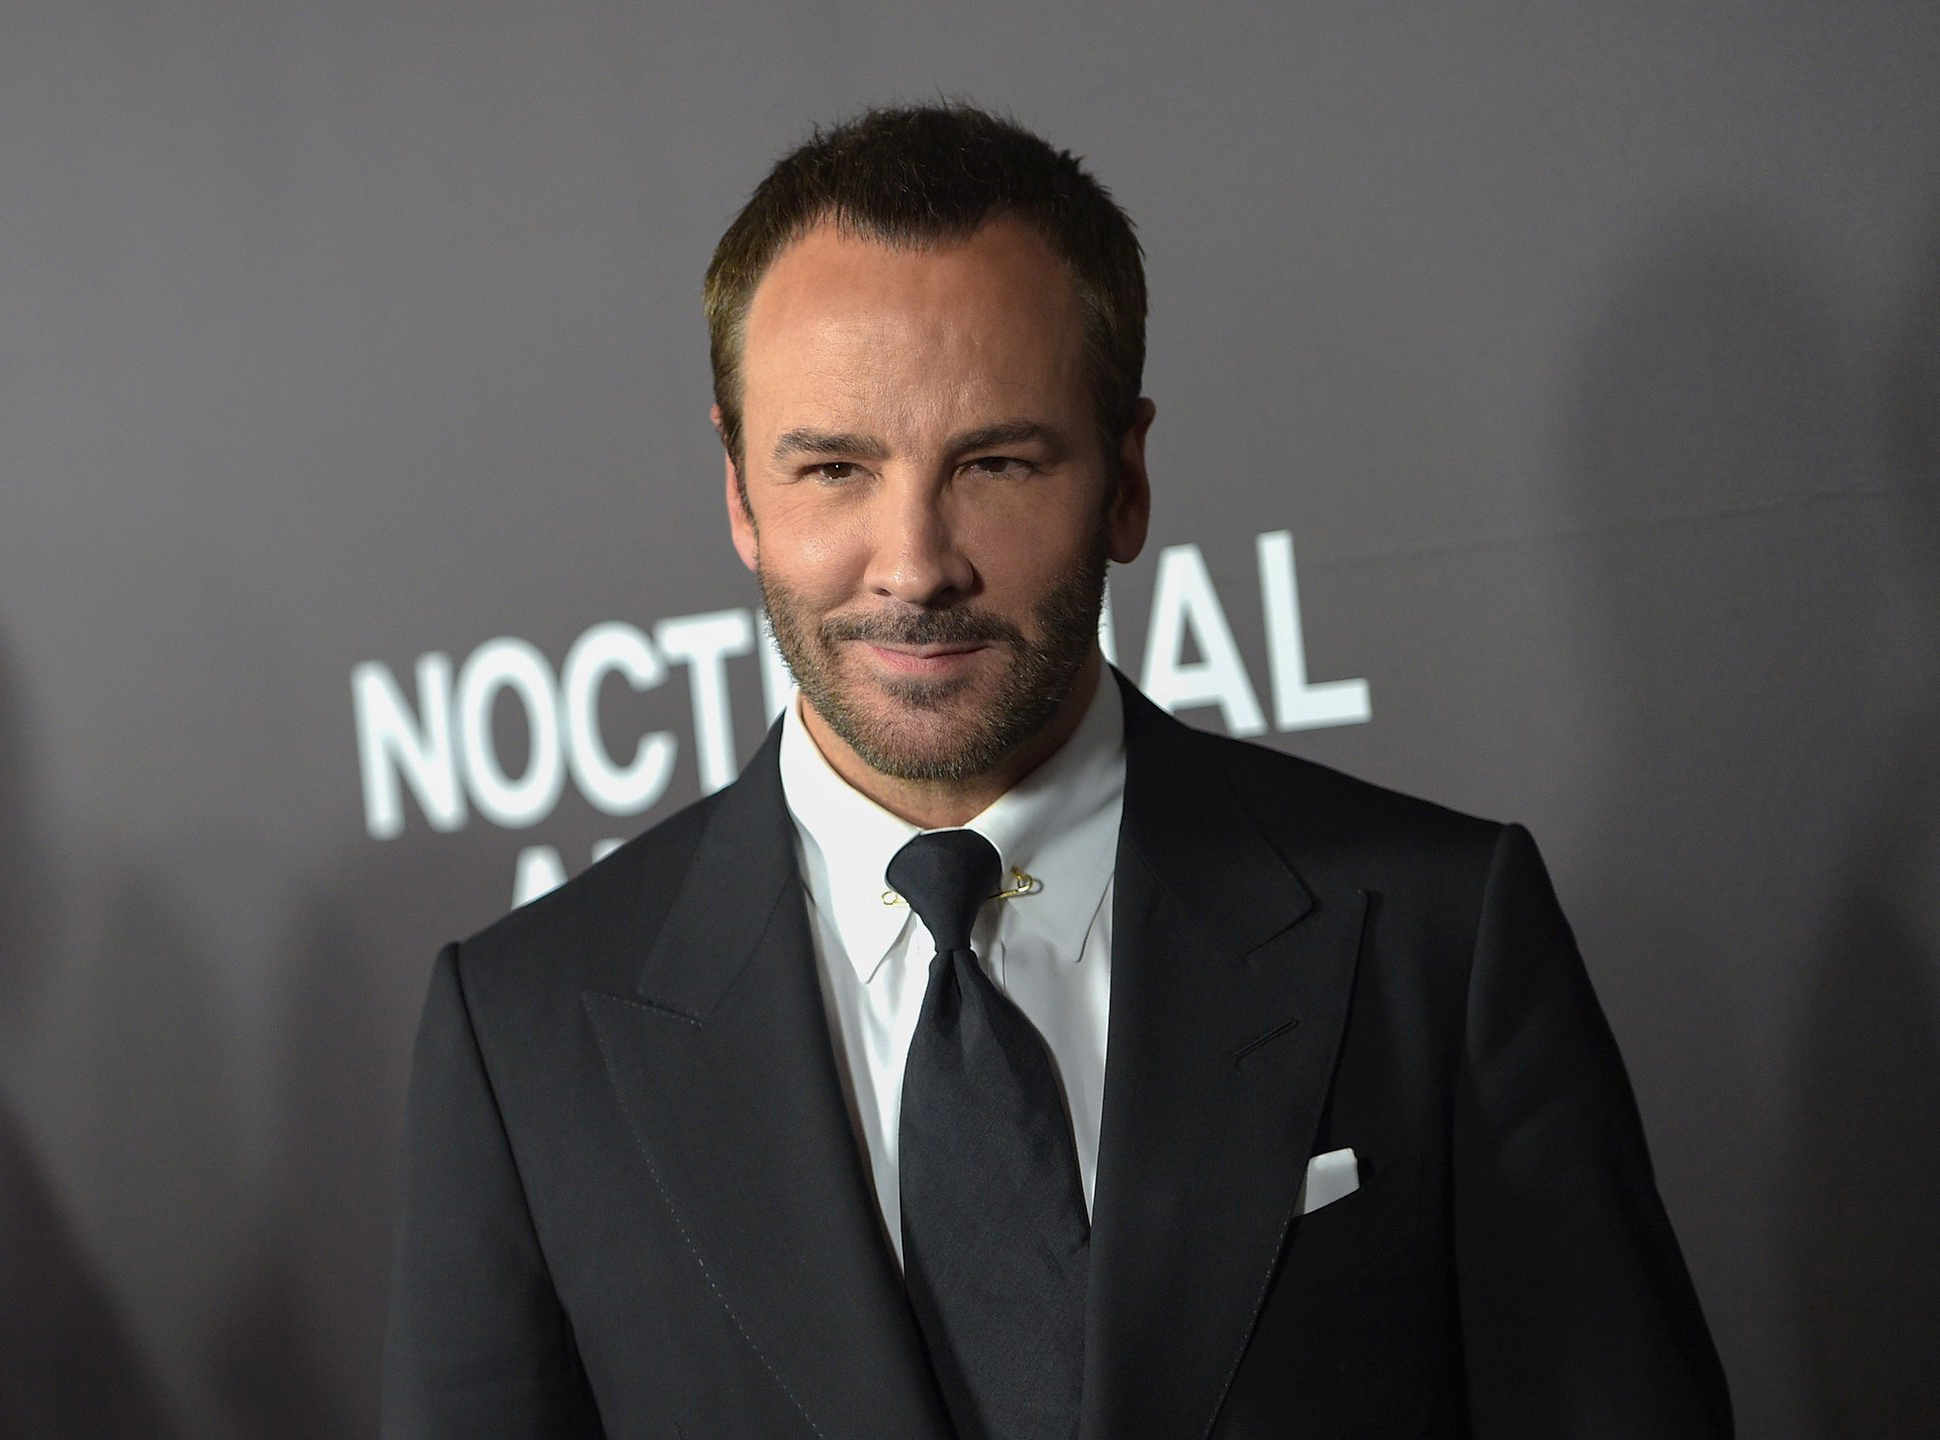 Tom Ford has built one of the top 30 suit brands